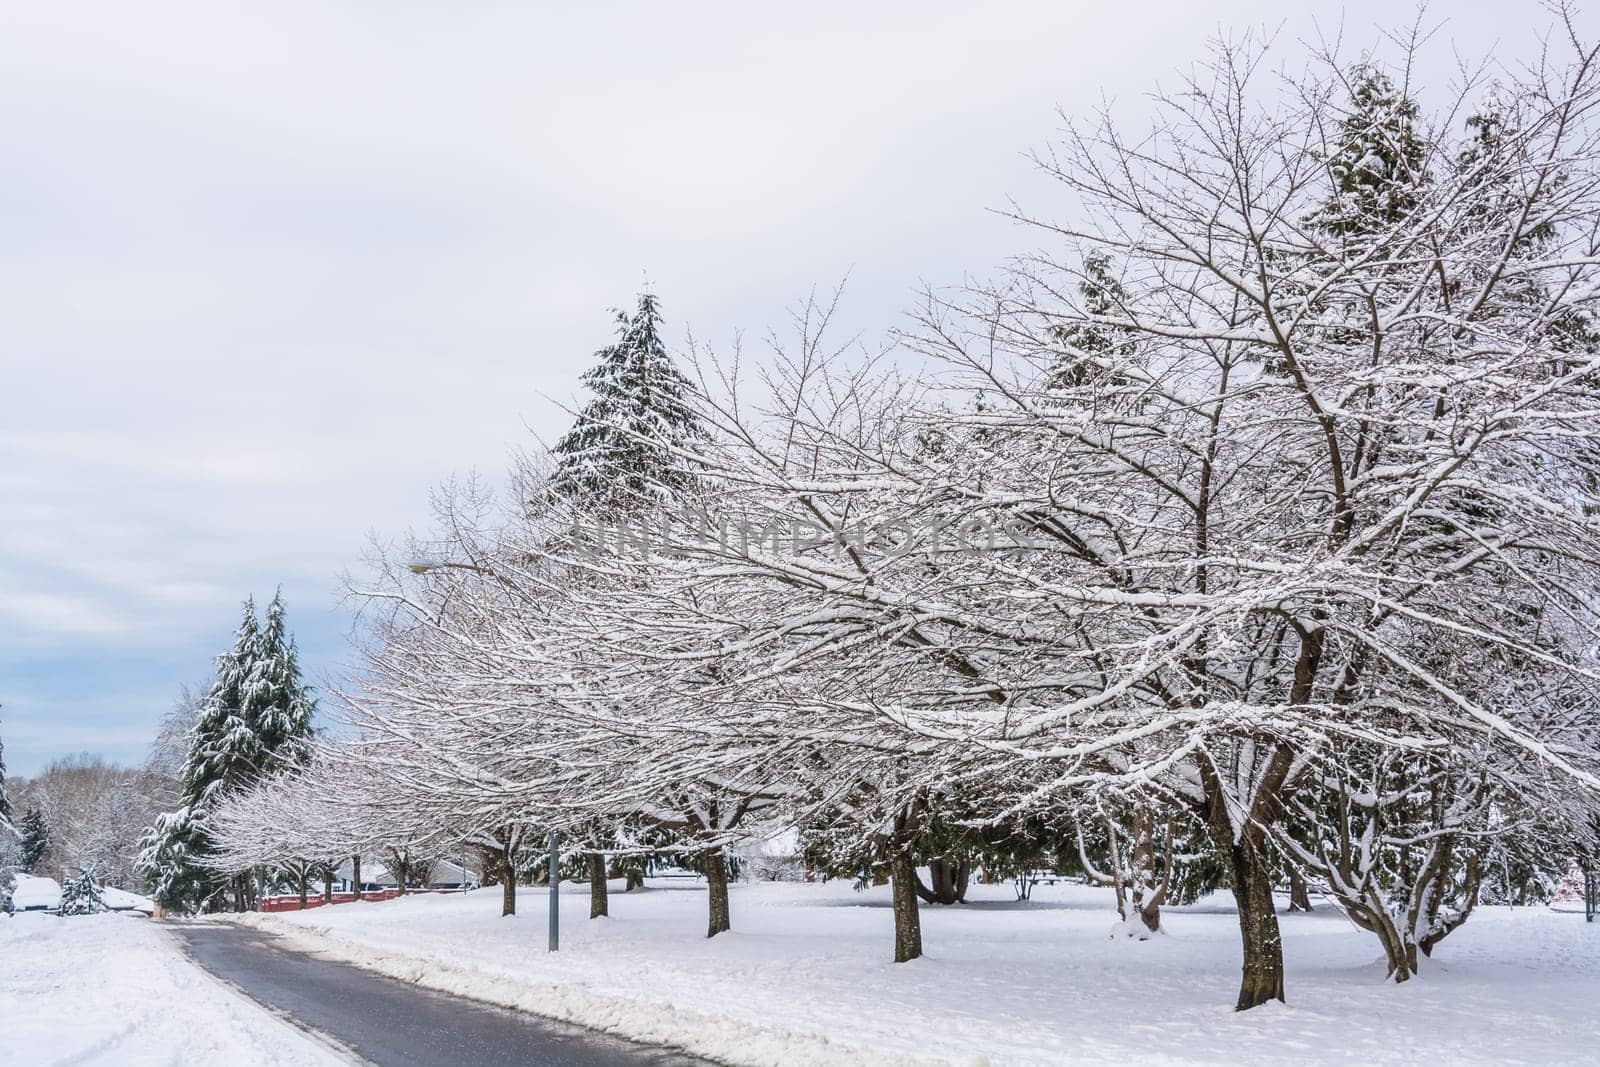 Snowed sacura trees on a street in winter Vancouver, Canada. by Imagenet